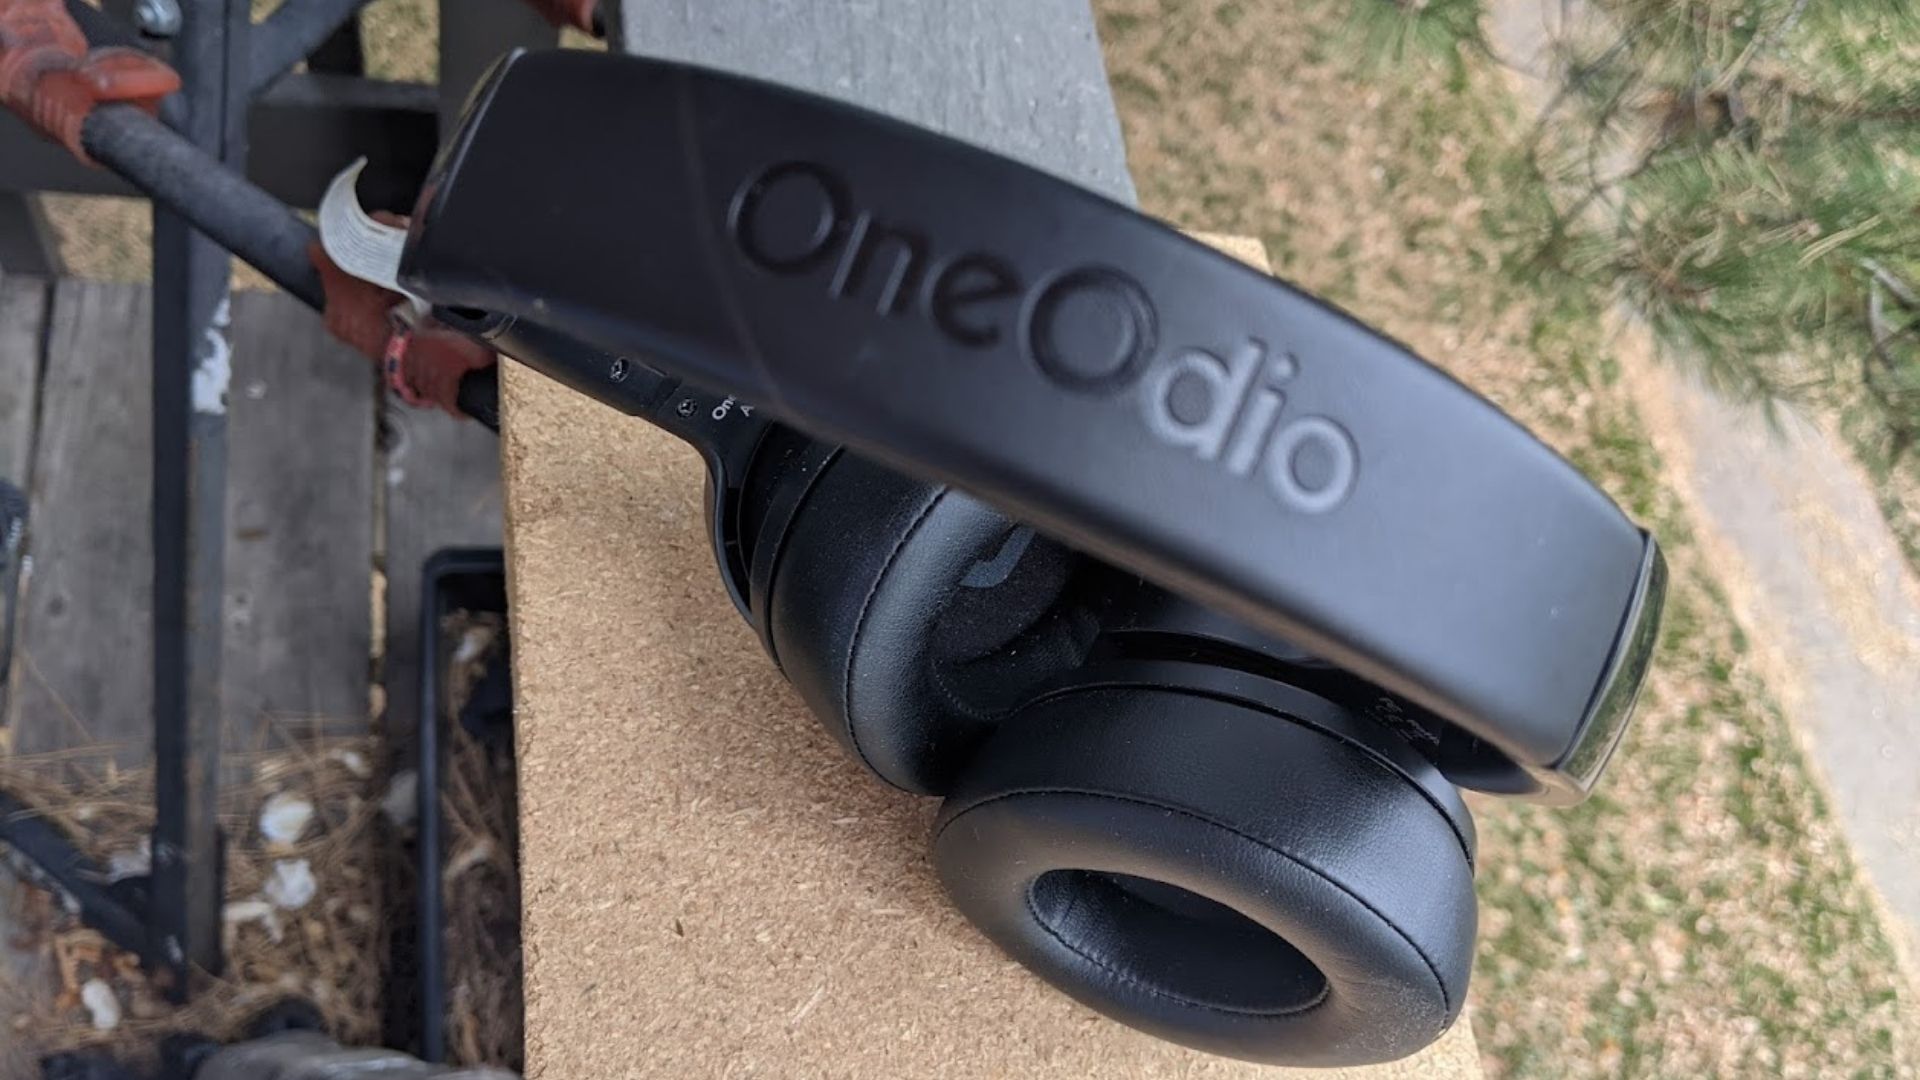 OneOdio A30 Noise Cancelling Bluetooth Headphones